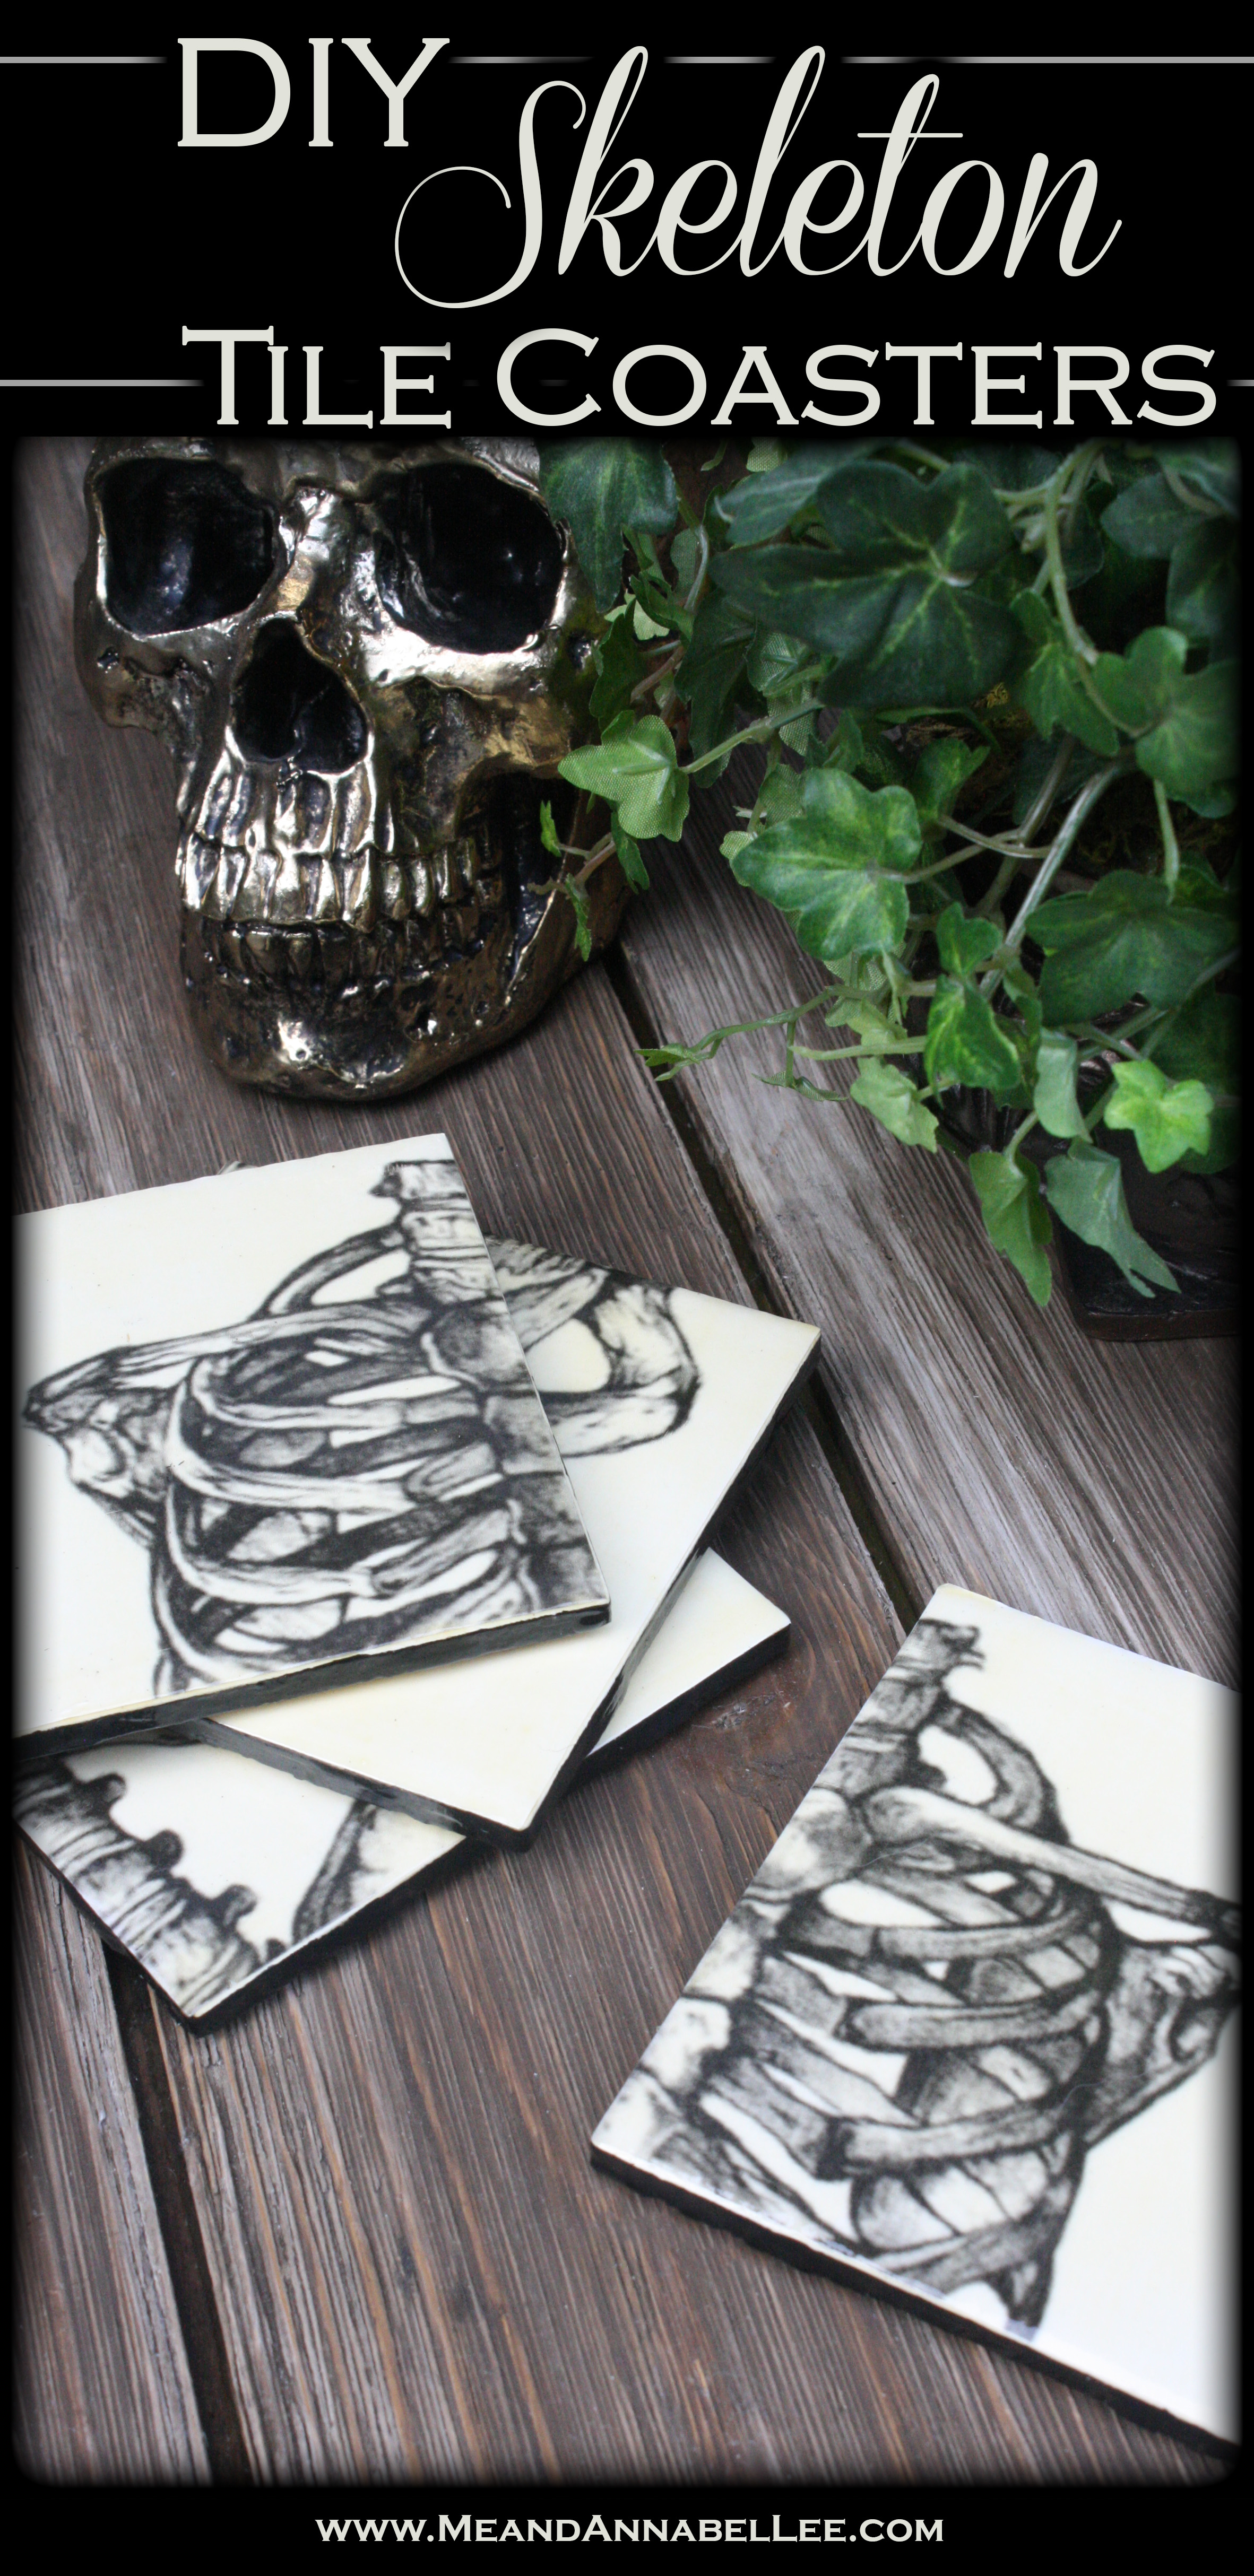 How to transform White 4 x 4 Wall Tiles into Gothic DIY Skeleton Drink Coasters | Ribcage Anatomy Image Transfer | Goth It Yourself | Antique Mod Podge | www.MeandAnnabelLee.com